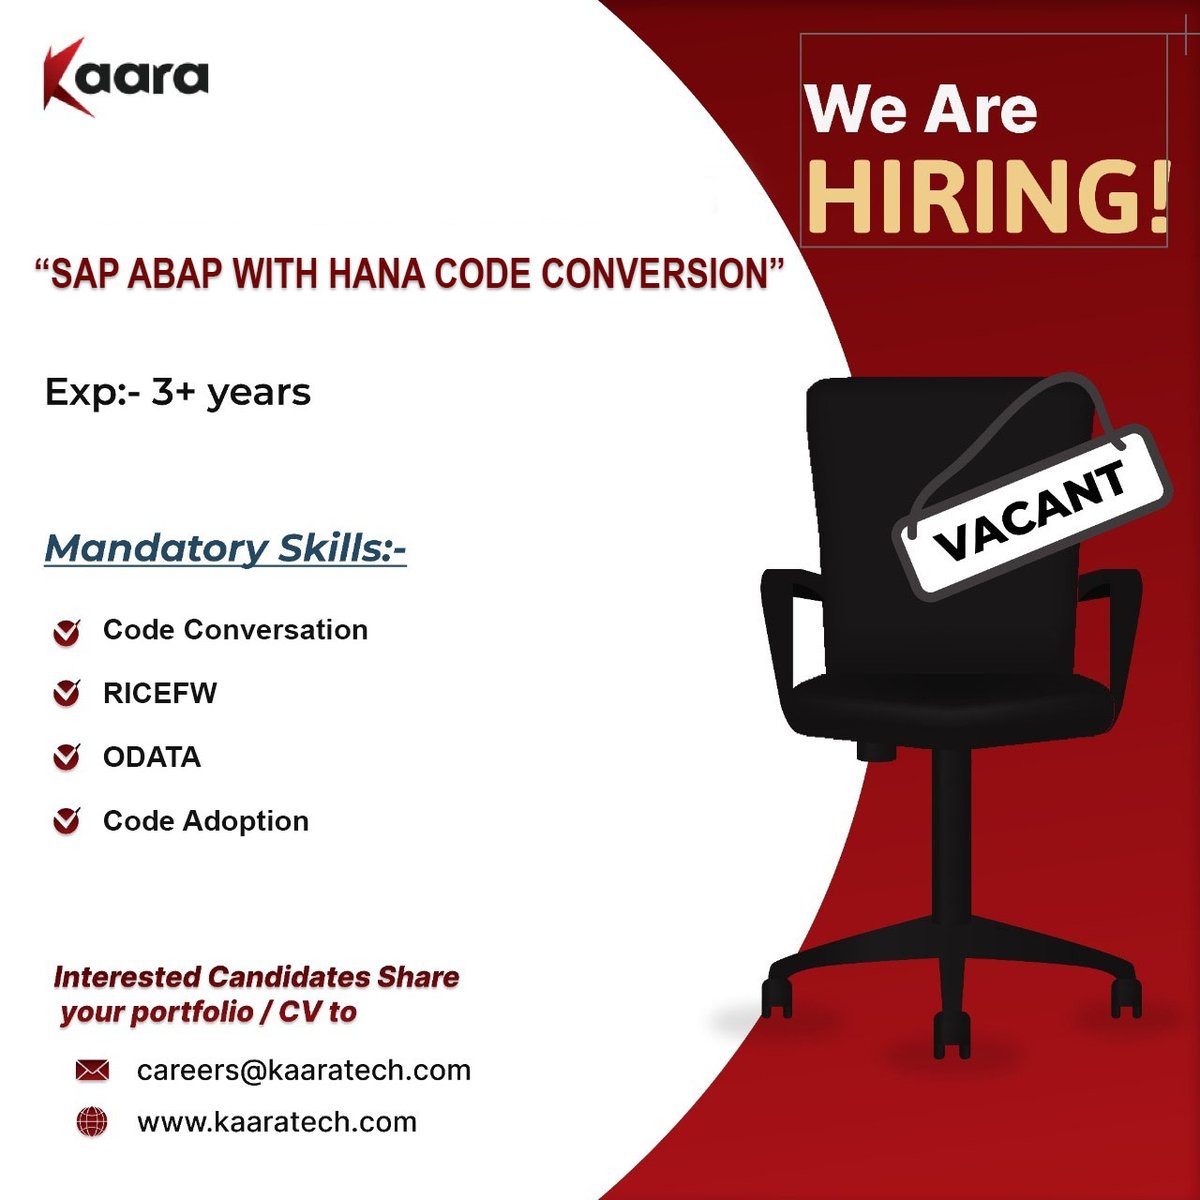 #kaara We Are Looking for a 'SAP ABAP WITH HANA CODE CONVERSION'

Exp:- 3+ Years

Interested Candidates Share your portfolio / CV to careers@kaaratech.com

Learn More:- kaaratech.com

#kaaratech #sap #hana #abap #codeconversion #itjobs #itjobsearch #technicaljobs